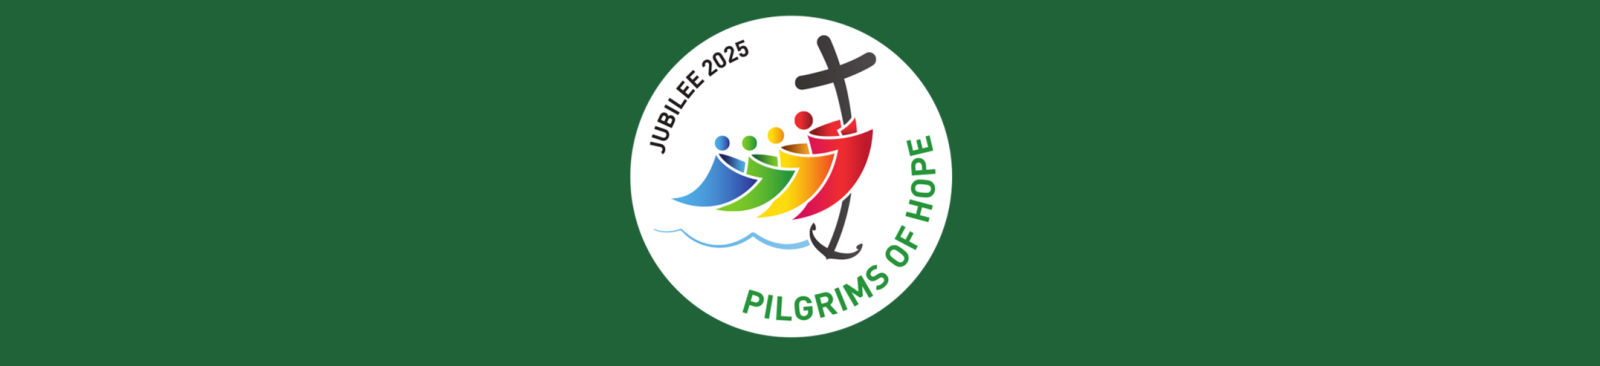 The Jubilee Year will be celebrated throughout 2025 via a calendar of special events, focusing on particular groups of people and specific themes. The theme for the 2025 Jubilee, chosen by Pope Francis, is “Pilgrims of Hope”.